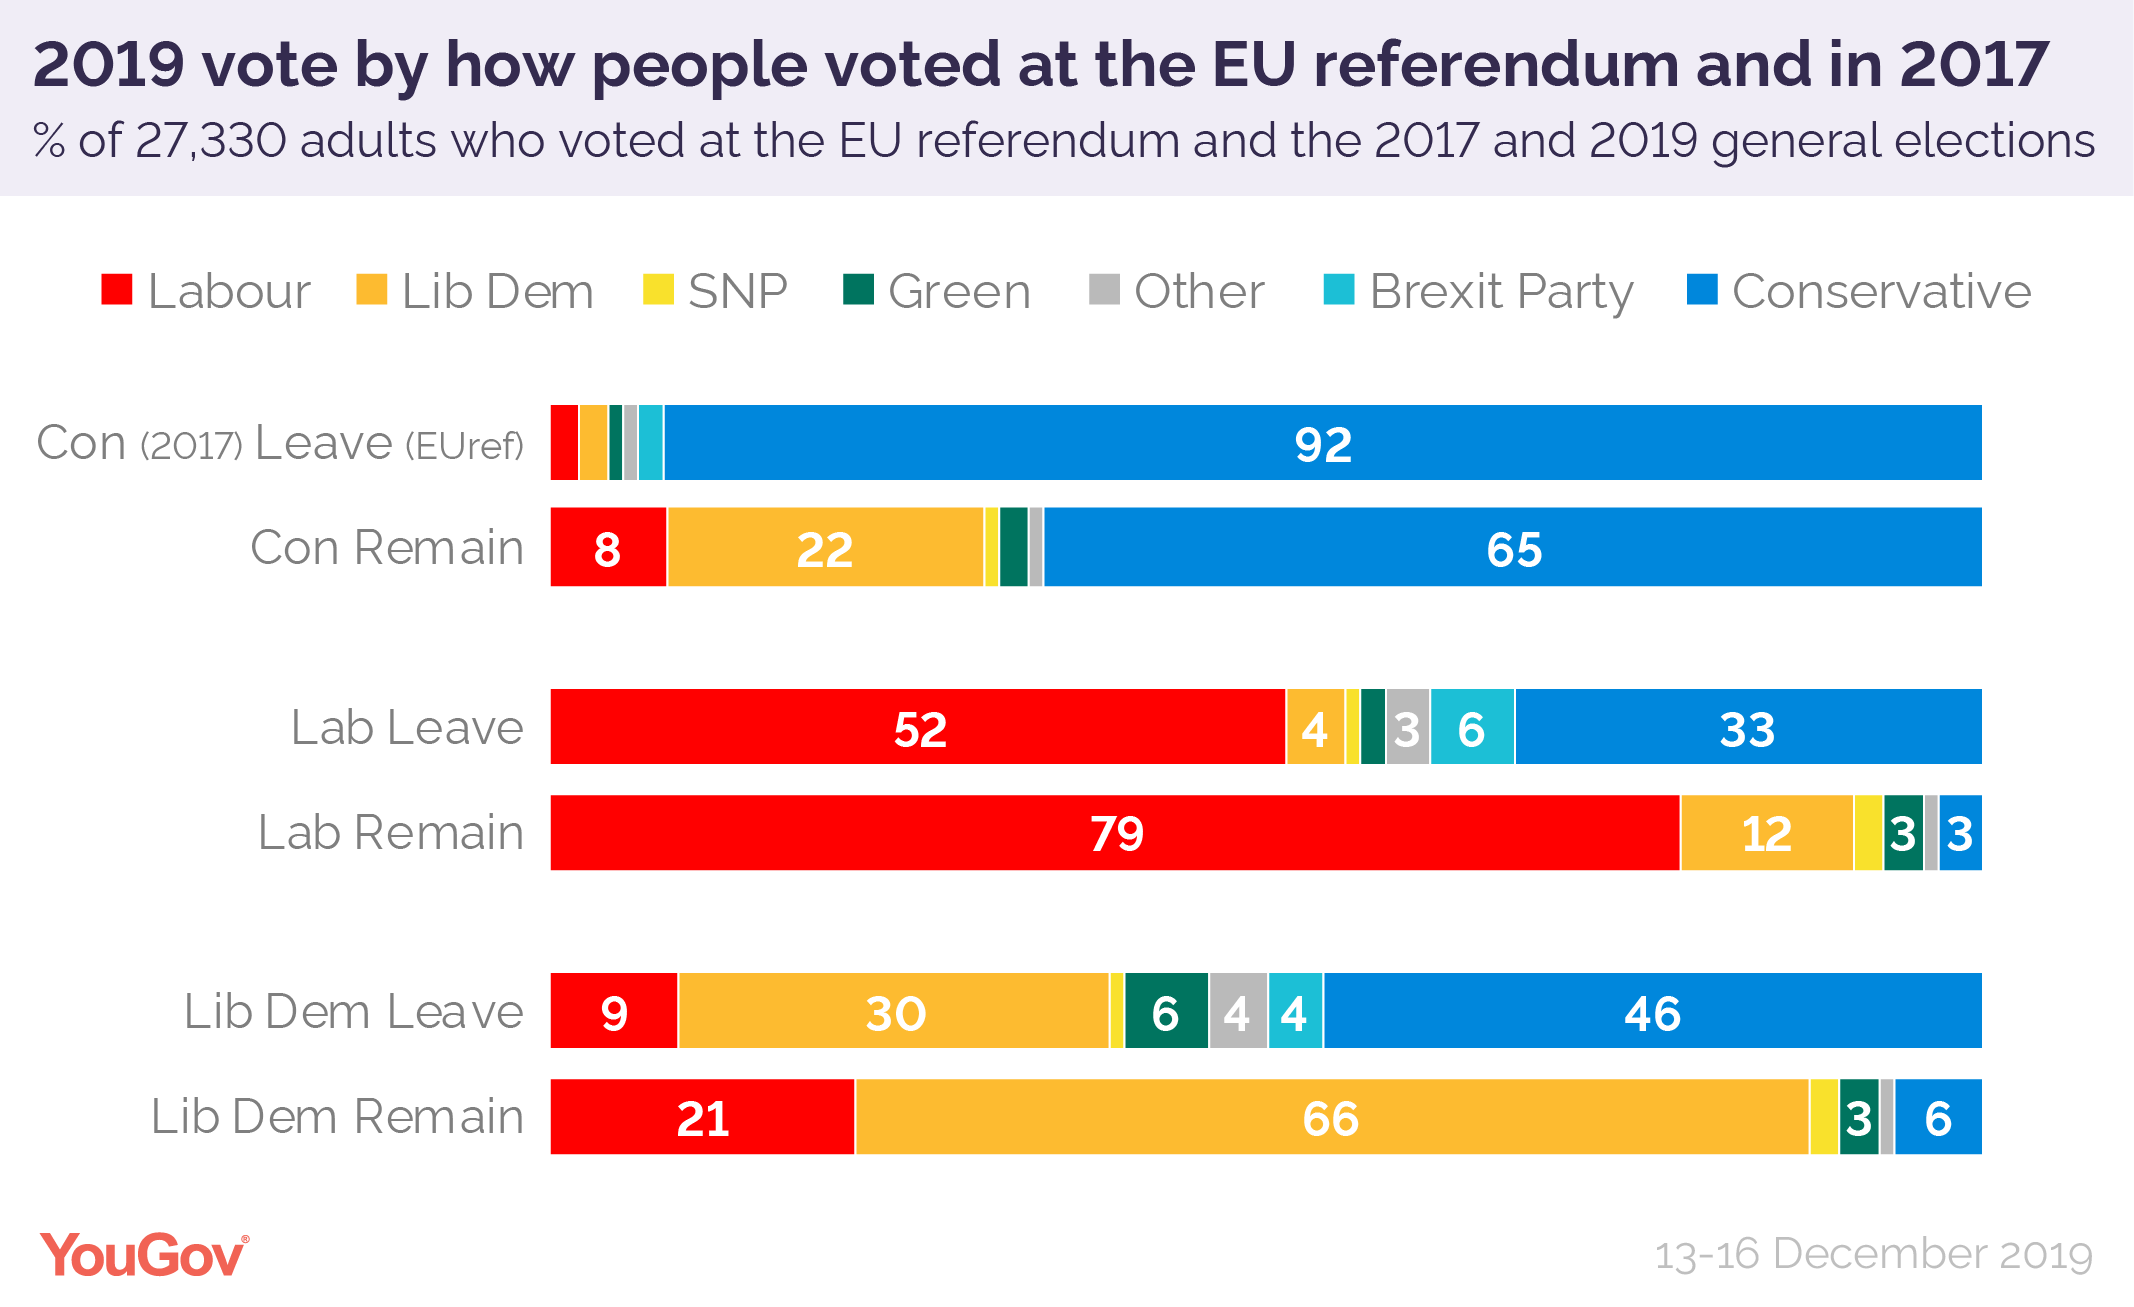 How%20Britain%20voted%202019%20EUref%20and%202017%20past%20vote-01.png